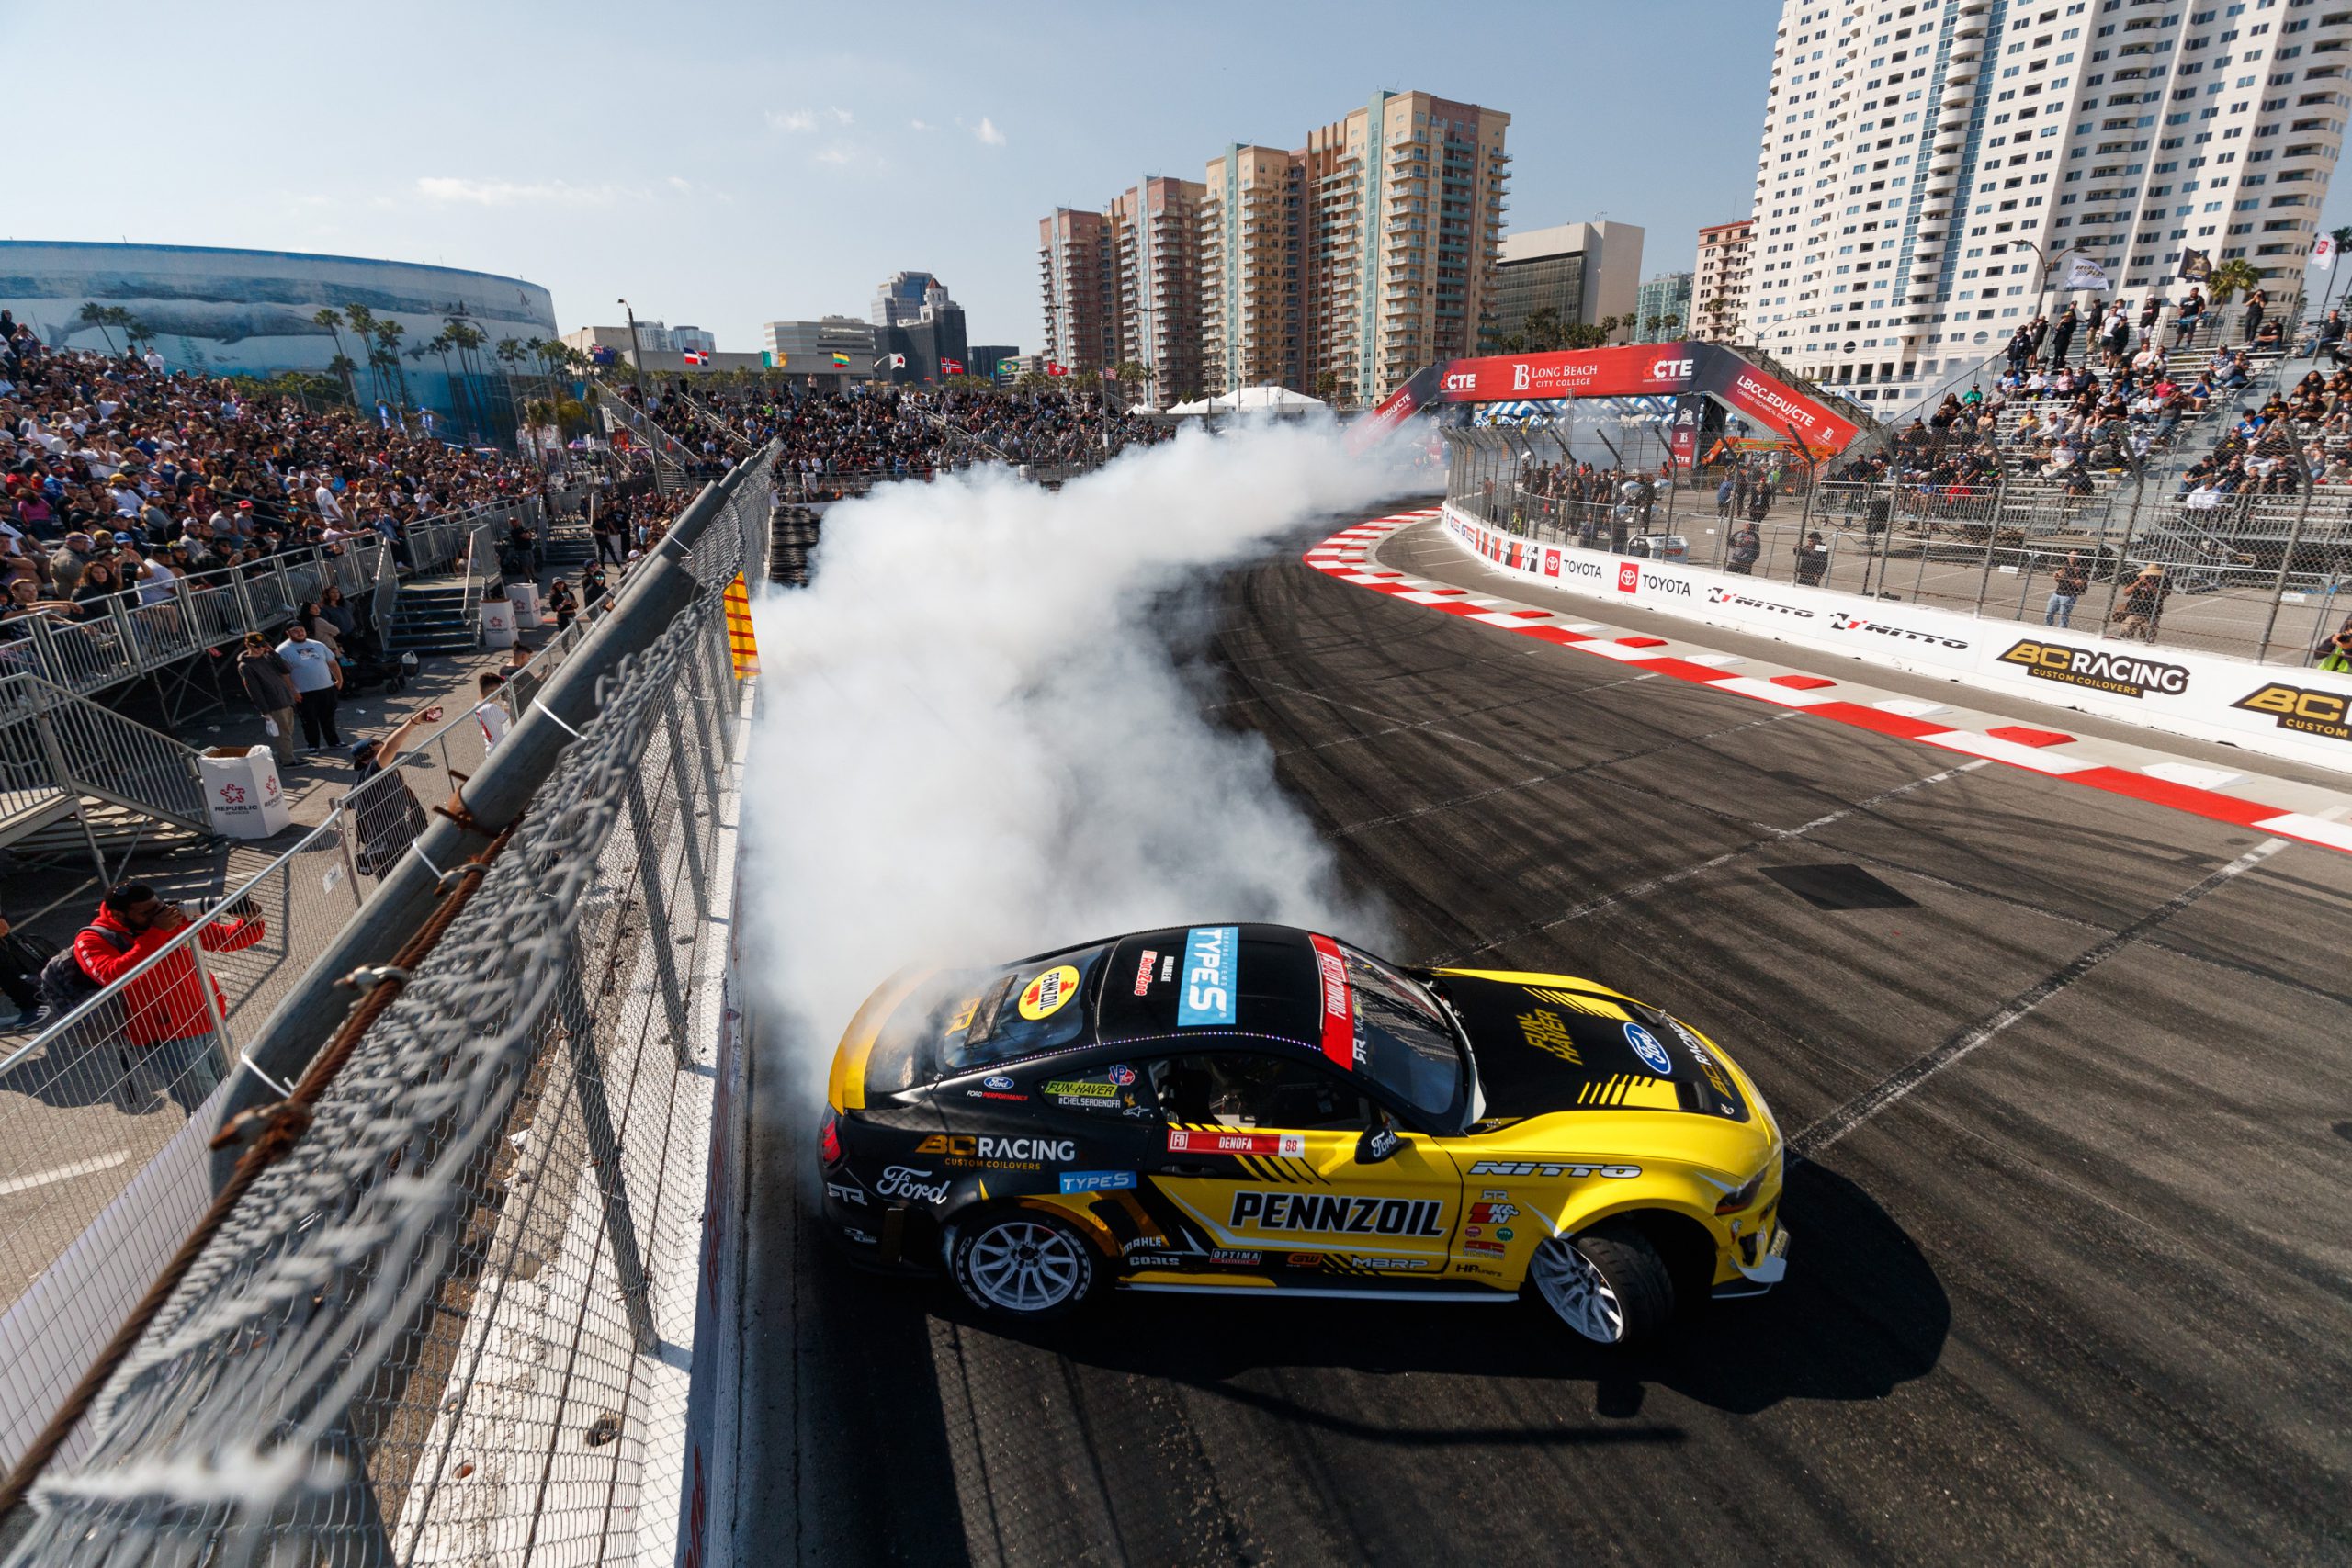 QUALIFYING RESULTS FROM OPENING ROUND OF 2022 FORMULA DRIFT PRO CHAMPIONSHIPS AT STREETS OF LONG BEACH